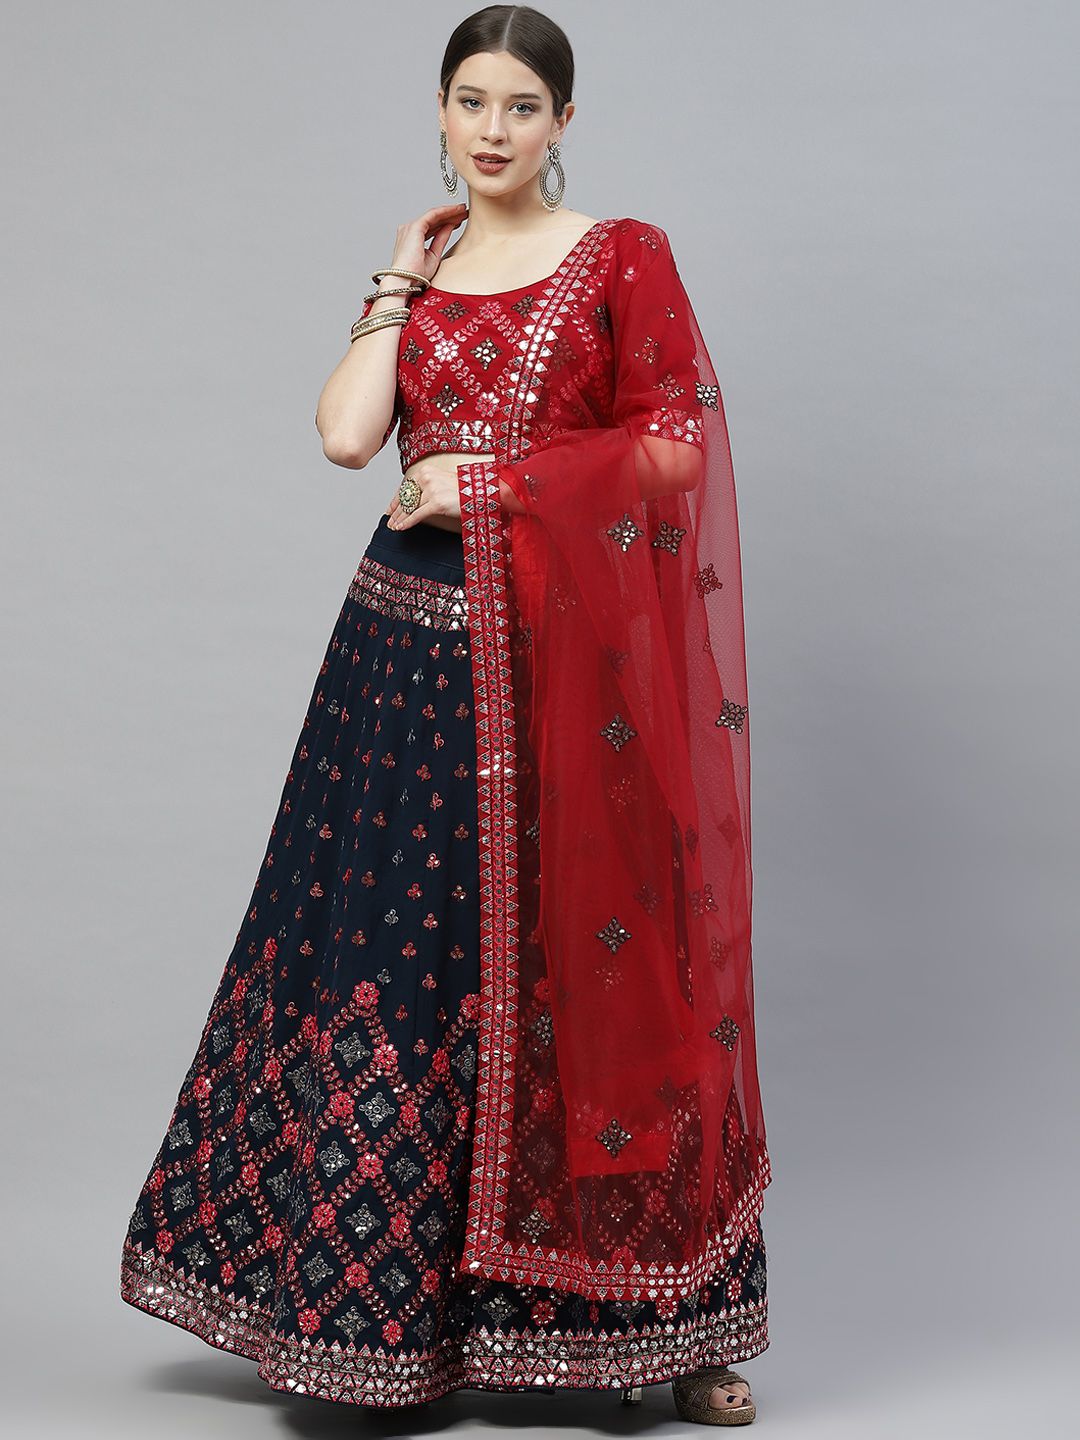 SHUBHKALA Teal Blue & Red Semi-Stitched Lehenga & Unstitched Blouse With Dupatta Price in India